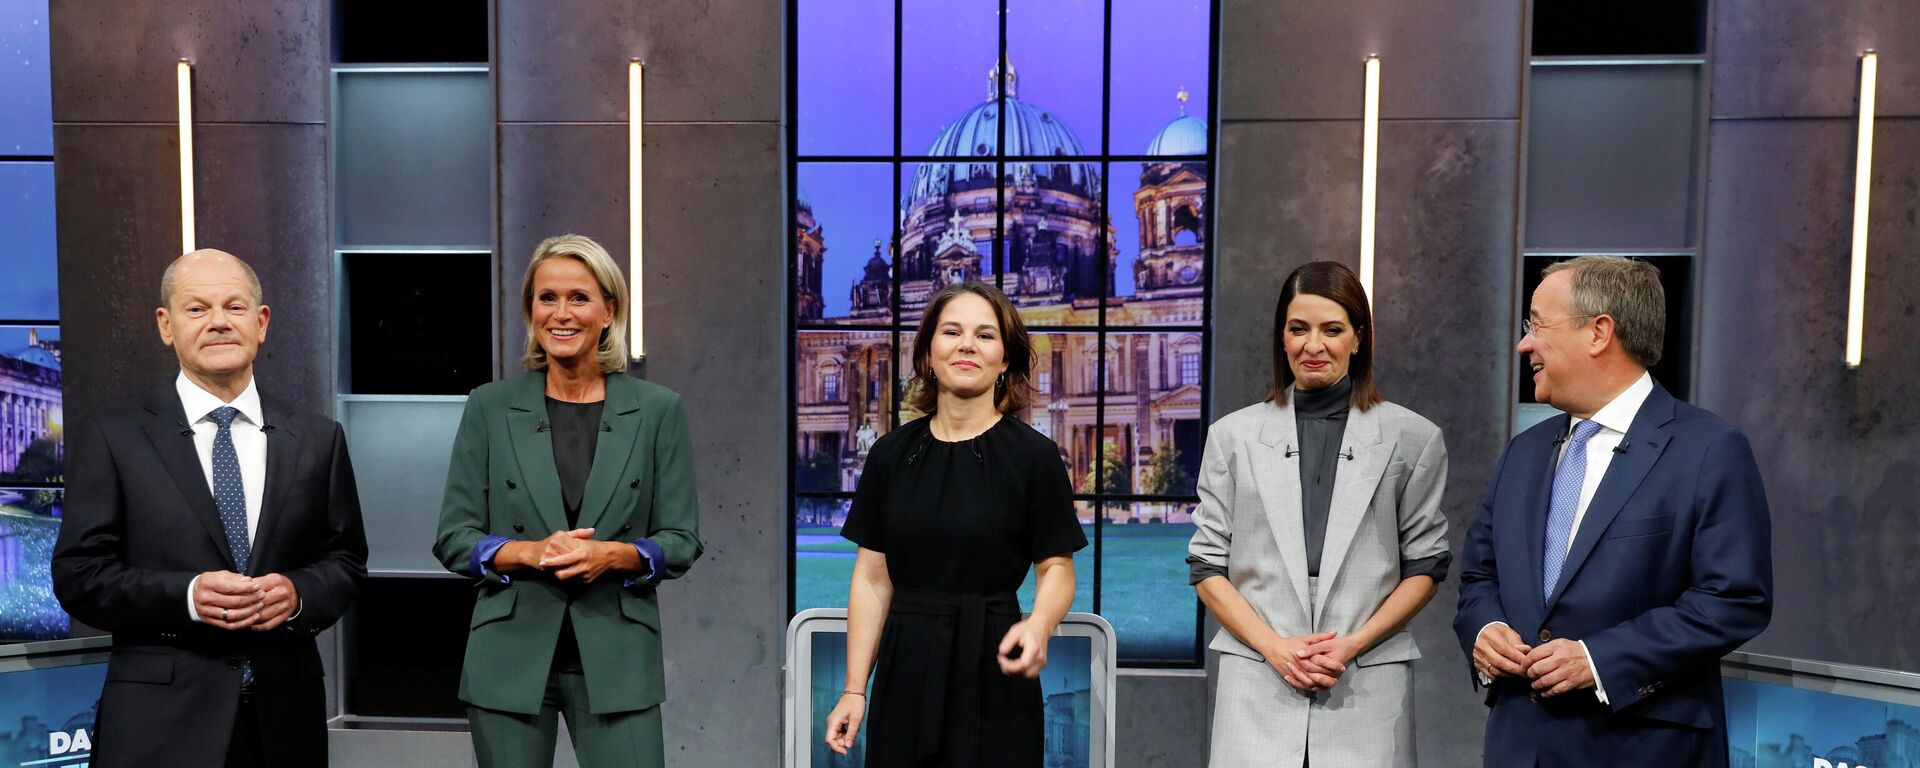 Candidates for the Federal elections Armin Laschet, CDU, Olaf Scholz, SPD and Annalena Baerbock, Greens pose with Linda Zervakis and Claudia von Brauchitsch for a photo, ahead of a TV talk show, in Berlin, Germany, September 19, 2021. REUTERS/Michele Tantussi - Sputnik International, 1920, 24.09.2021